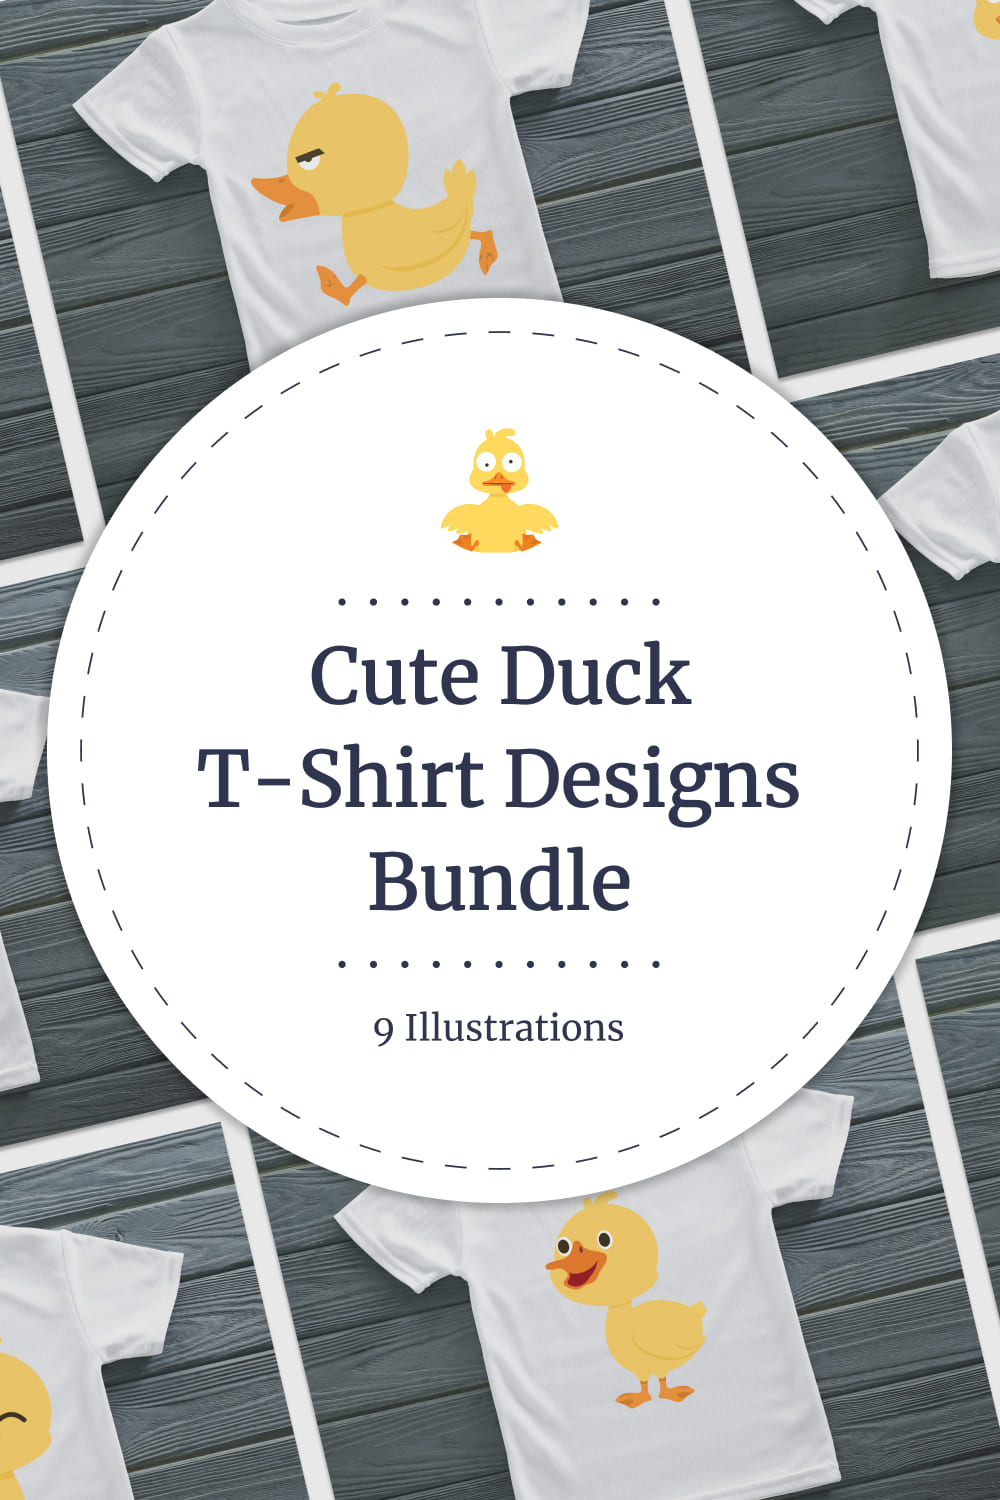 Bundle of images of t-shirts with wonderful prints of a cute duck.